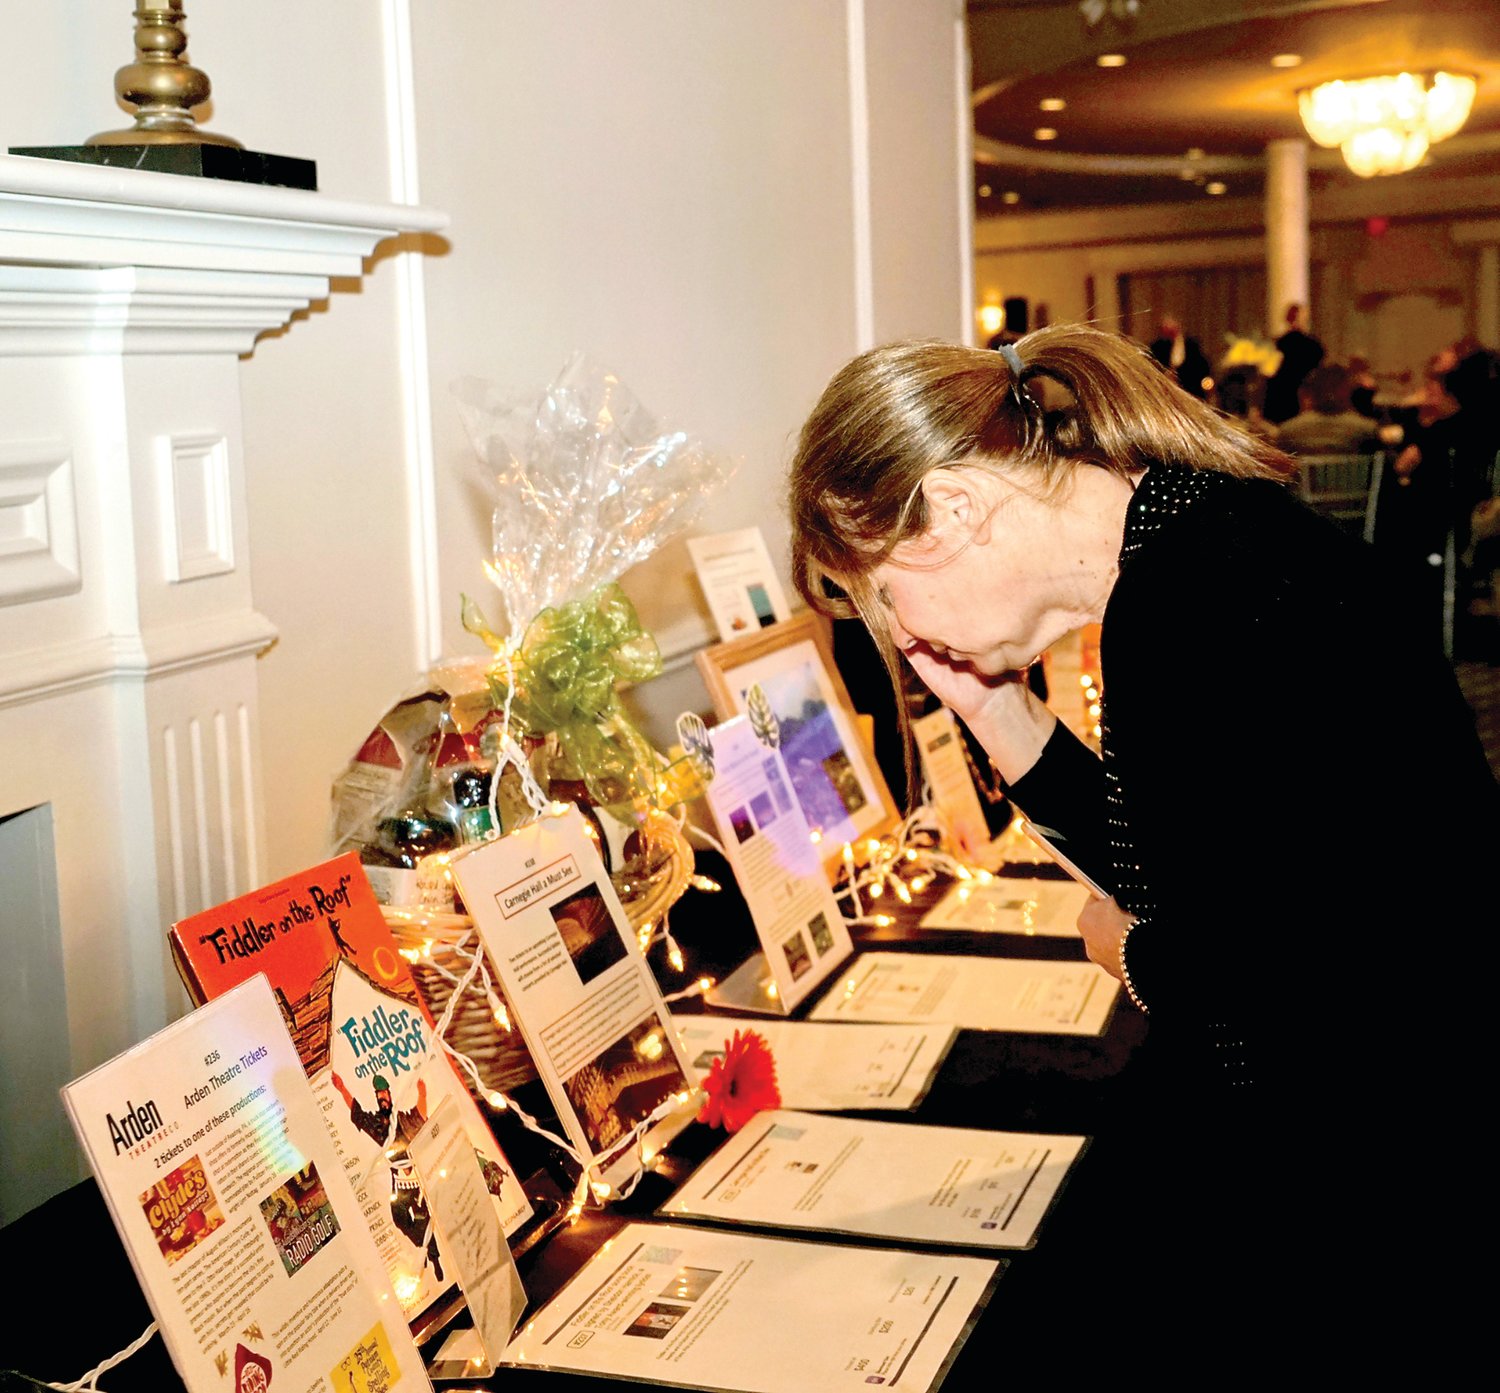 The YOBC’s annual benefit included a silent auction that featured everything from tickets to Flyers, Reading Phillies and Trenton Thunder games and gift cards to local restaurants to a tour of the U.S. Capitol building with Congressman Brian Fitzpatrick.